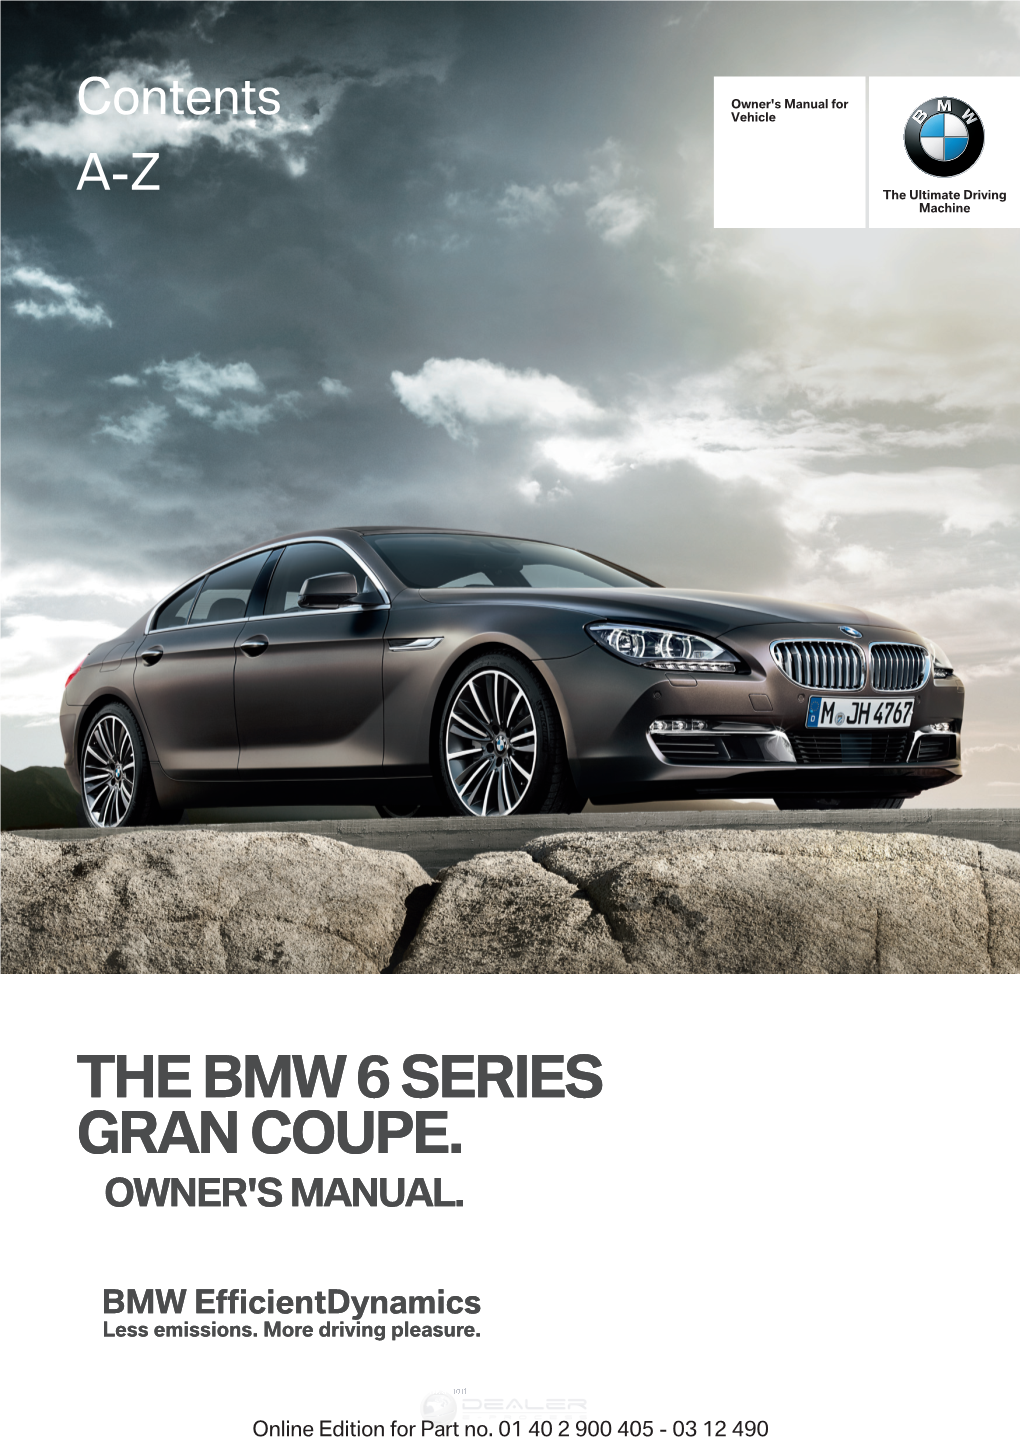 The Bmw 6 Series Gran Coupe. Owner's Manual